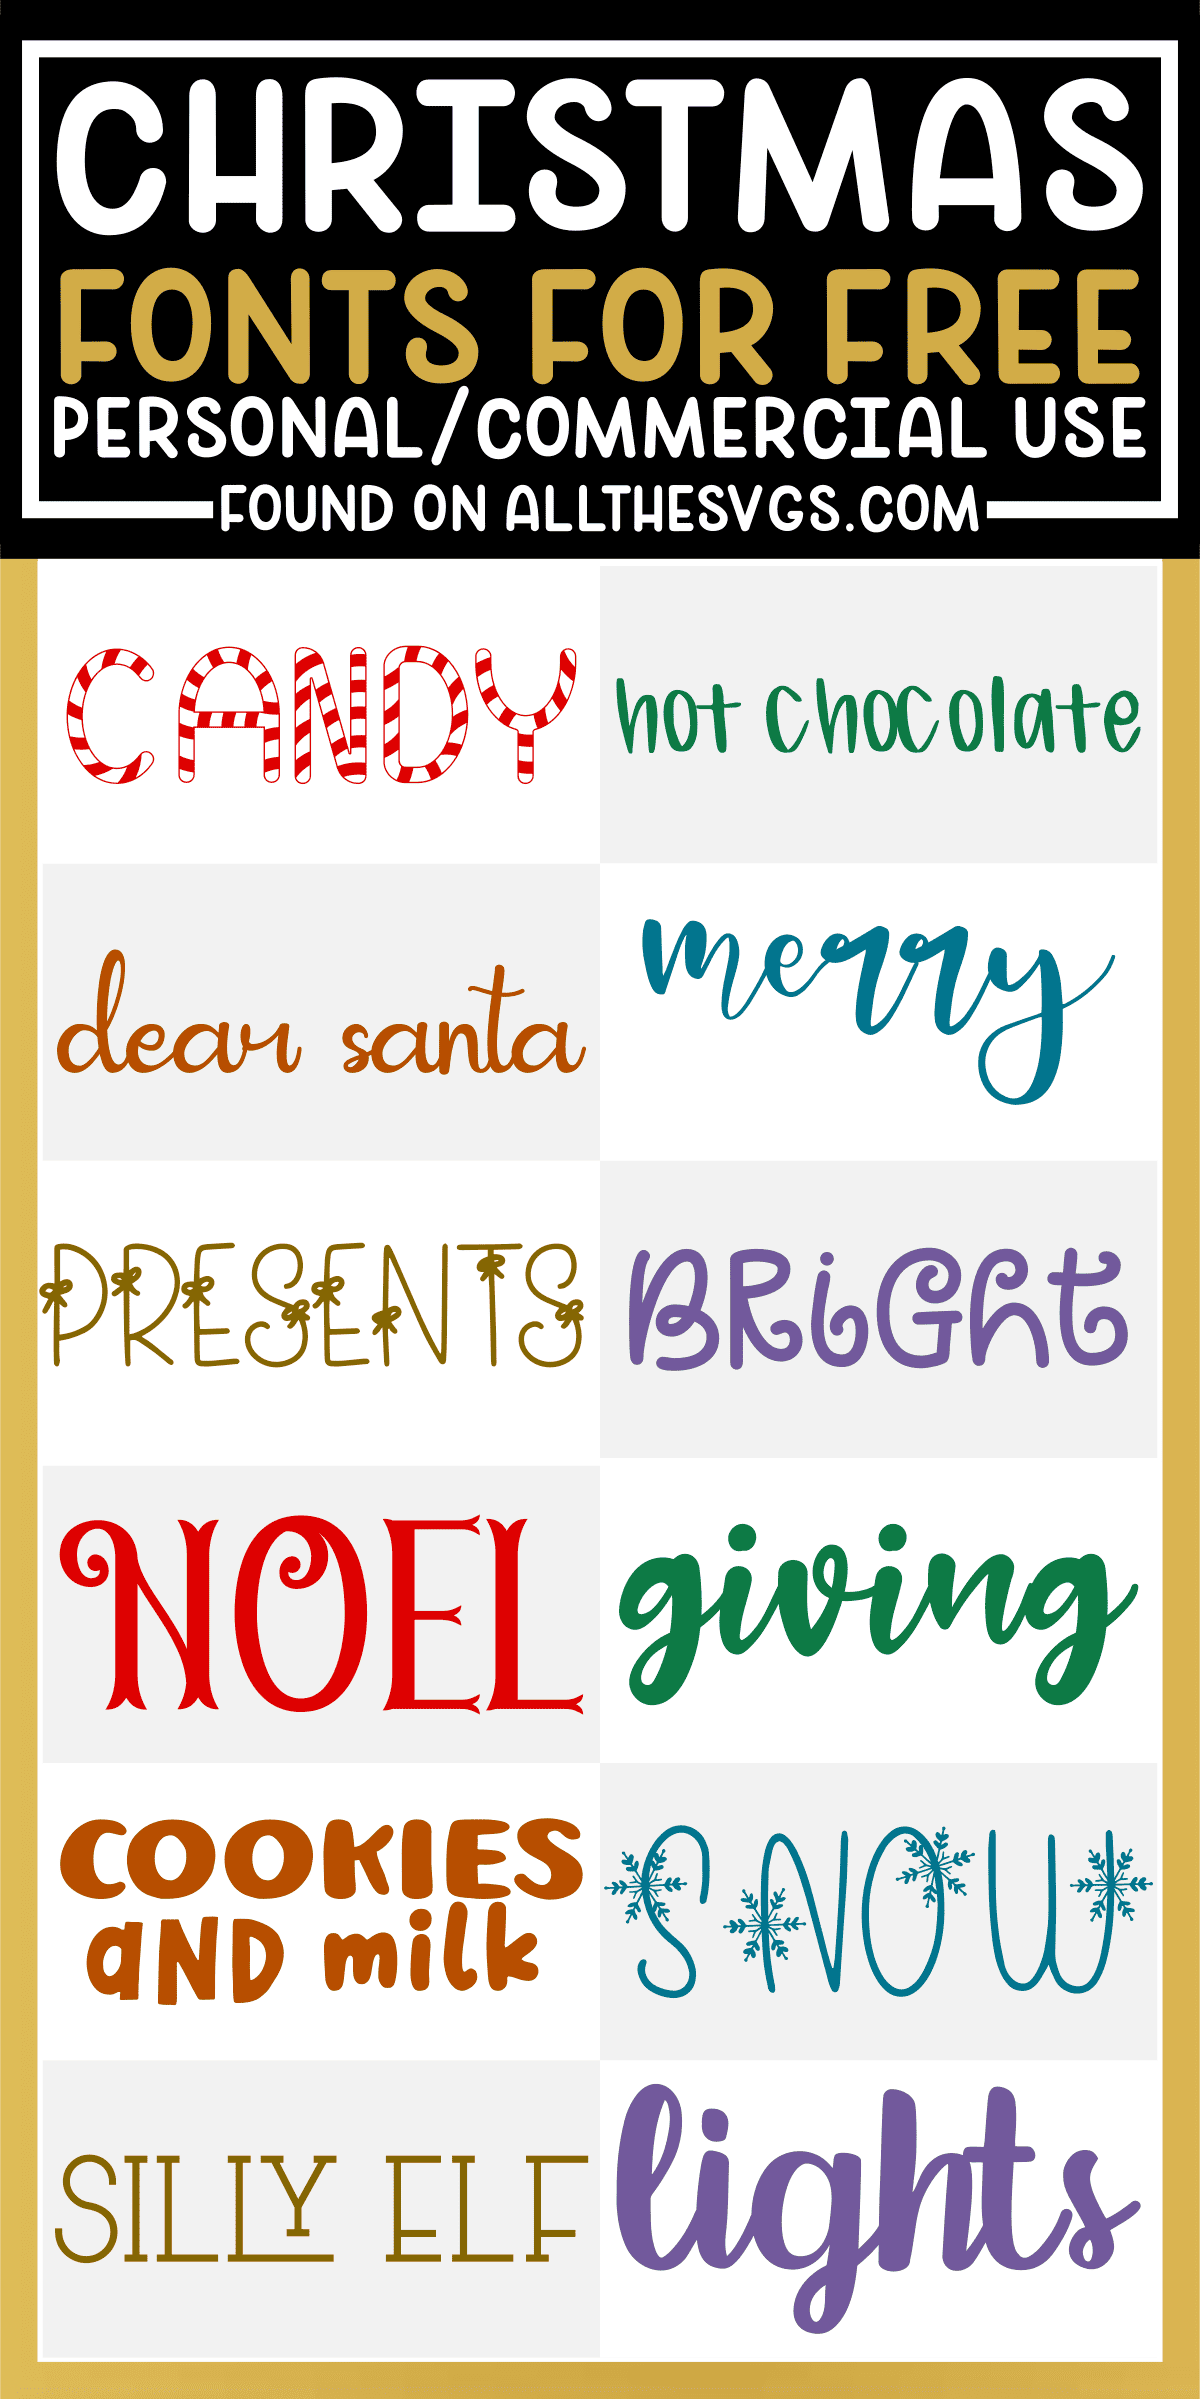 showcase of 12 best free christmas winter fonts for commercial use.